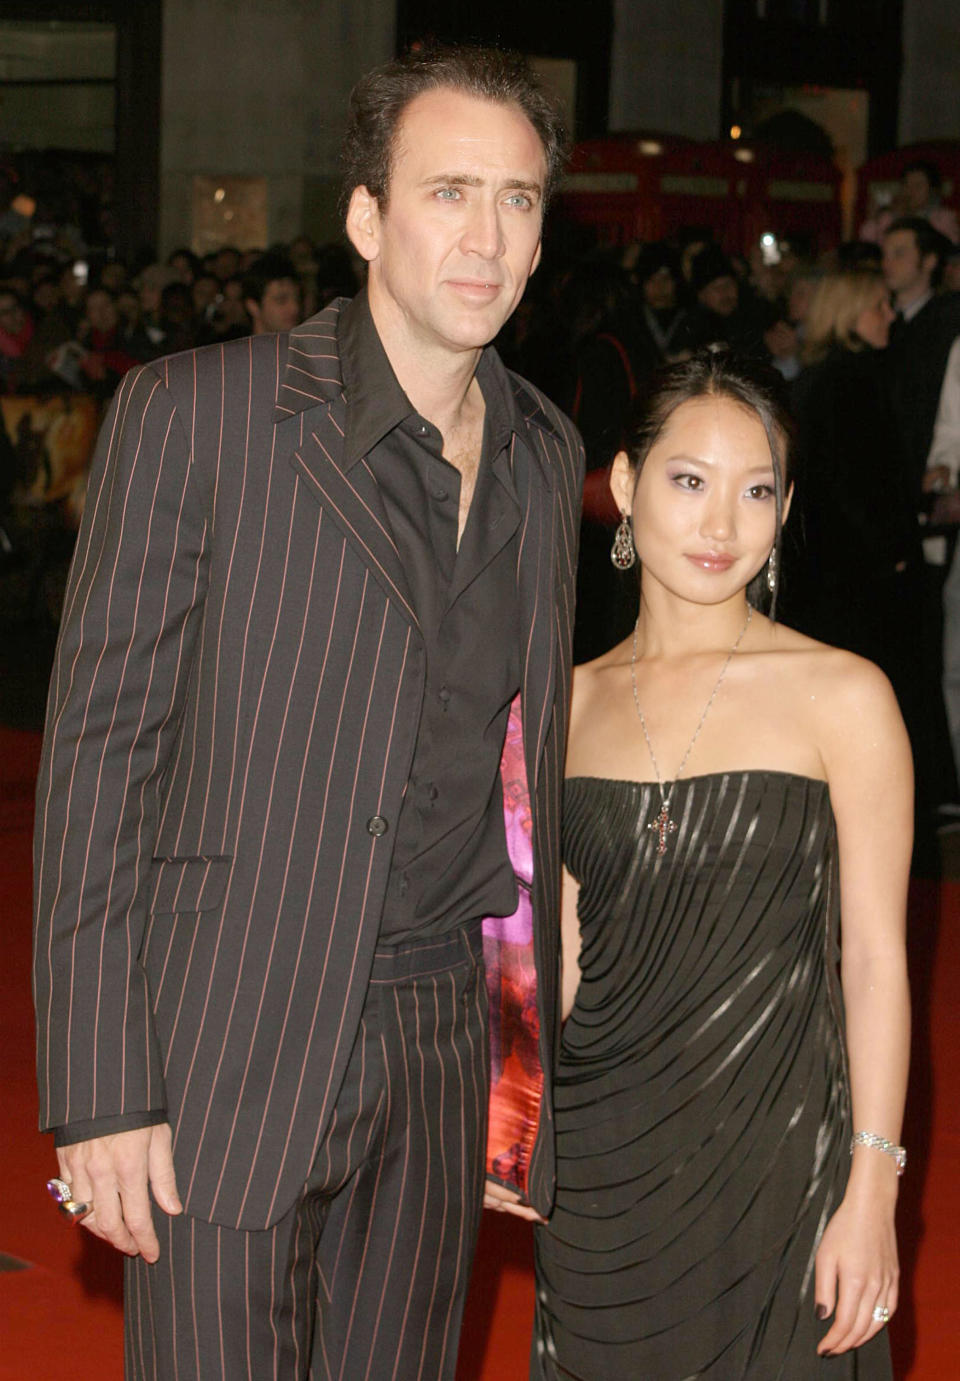 They're on the red carpet; he's in a pin-striped suit and shirt, and she's wearing a strapless dress